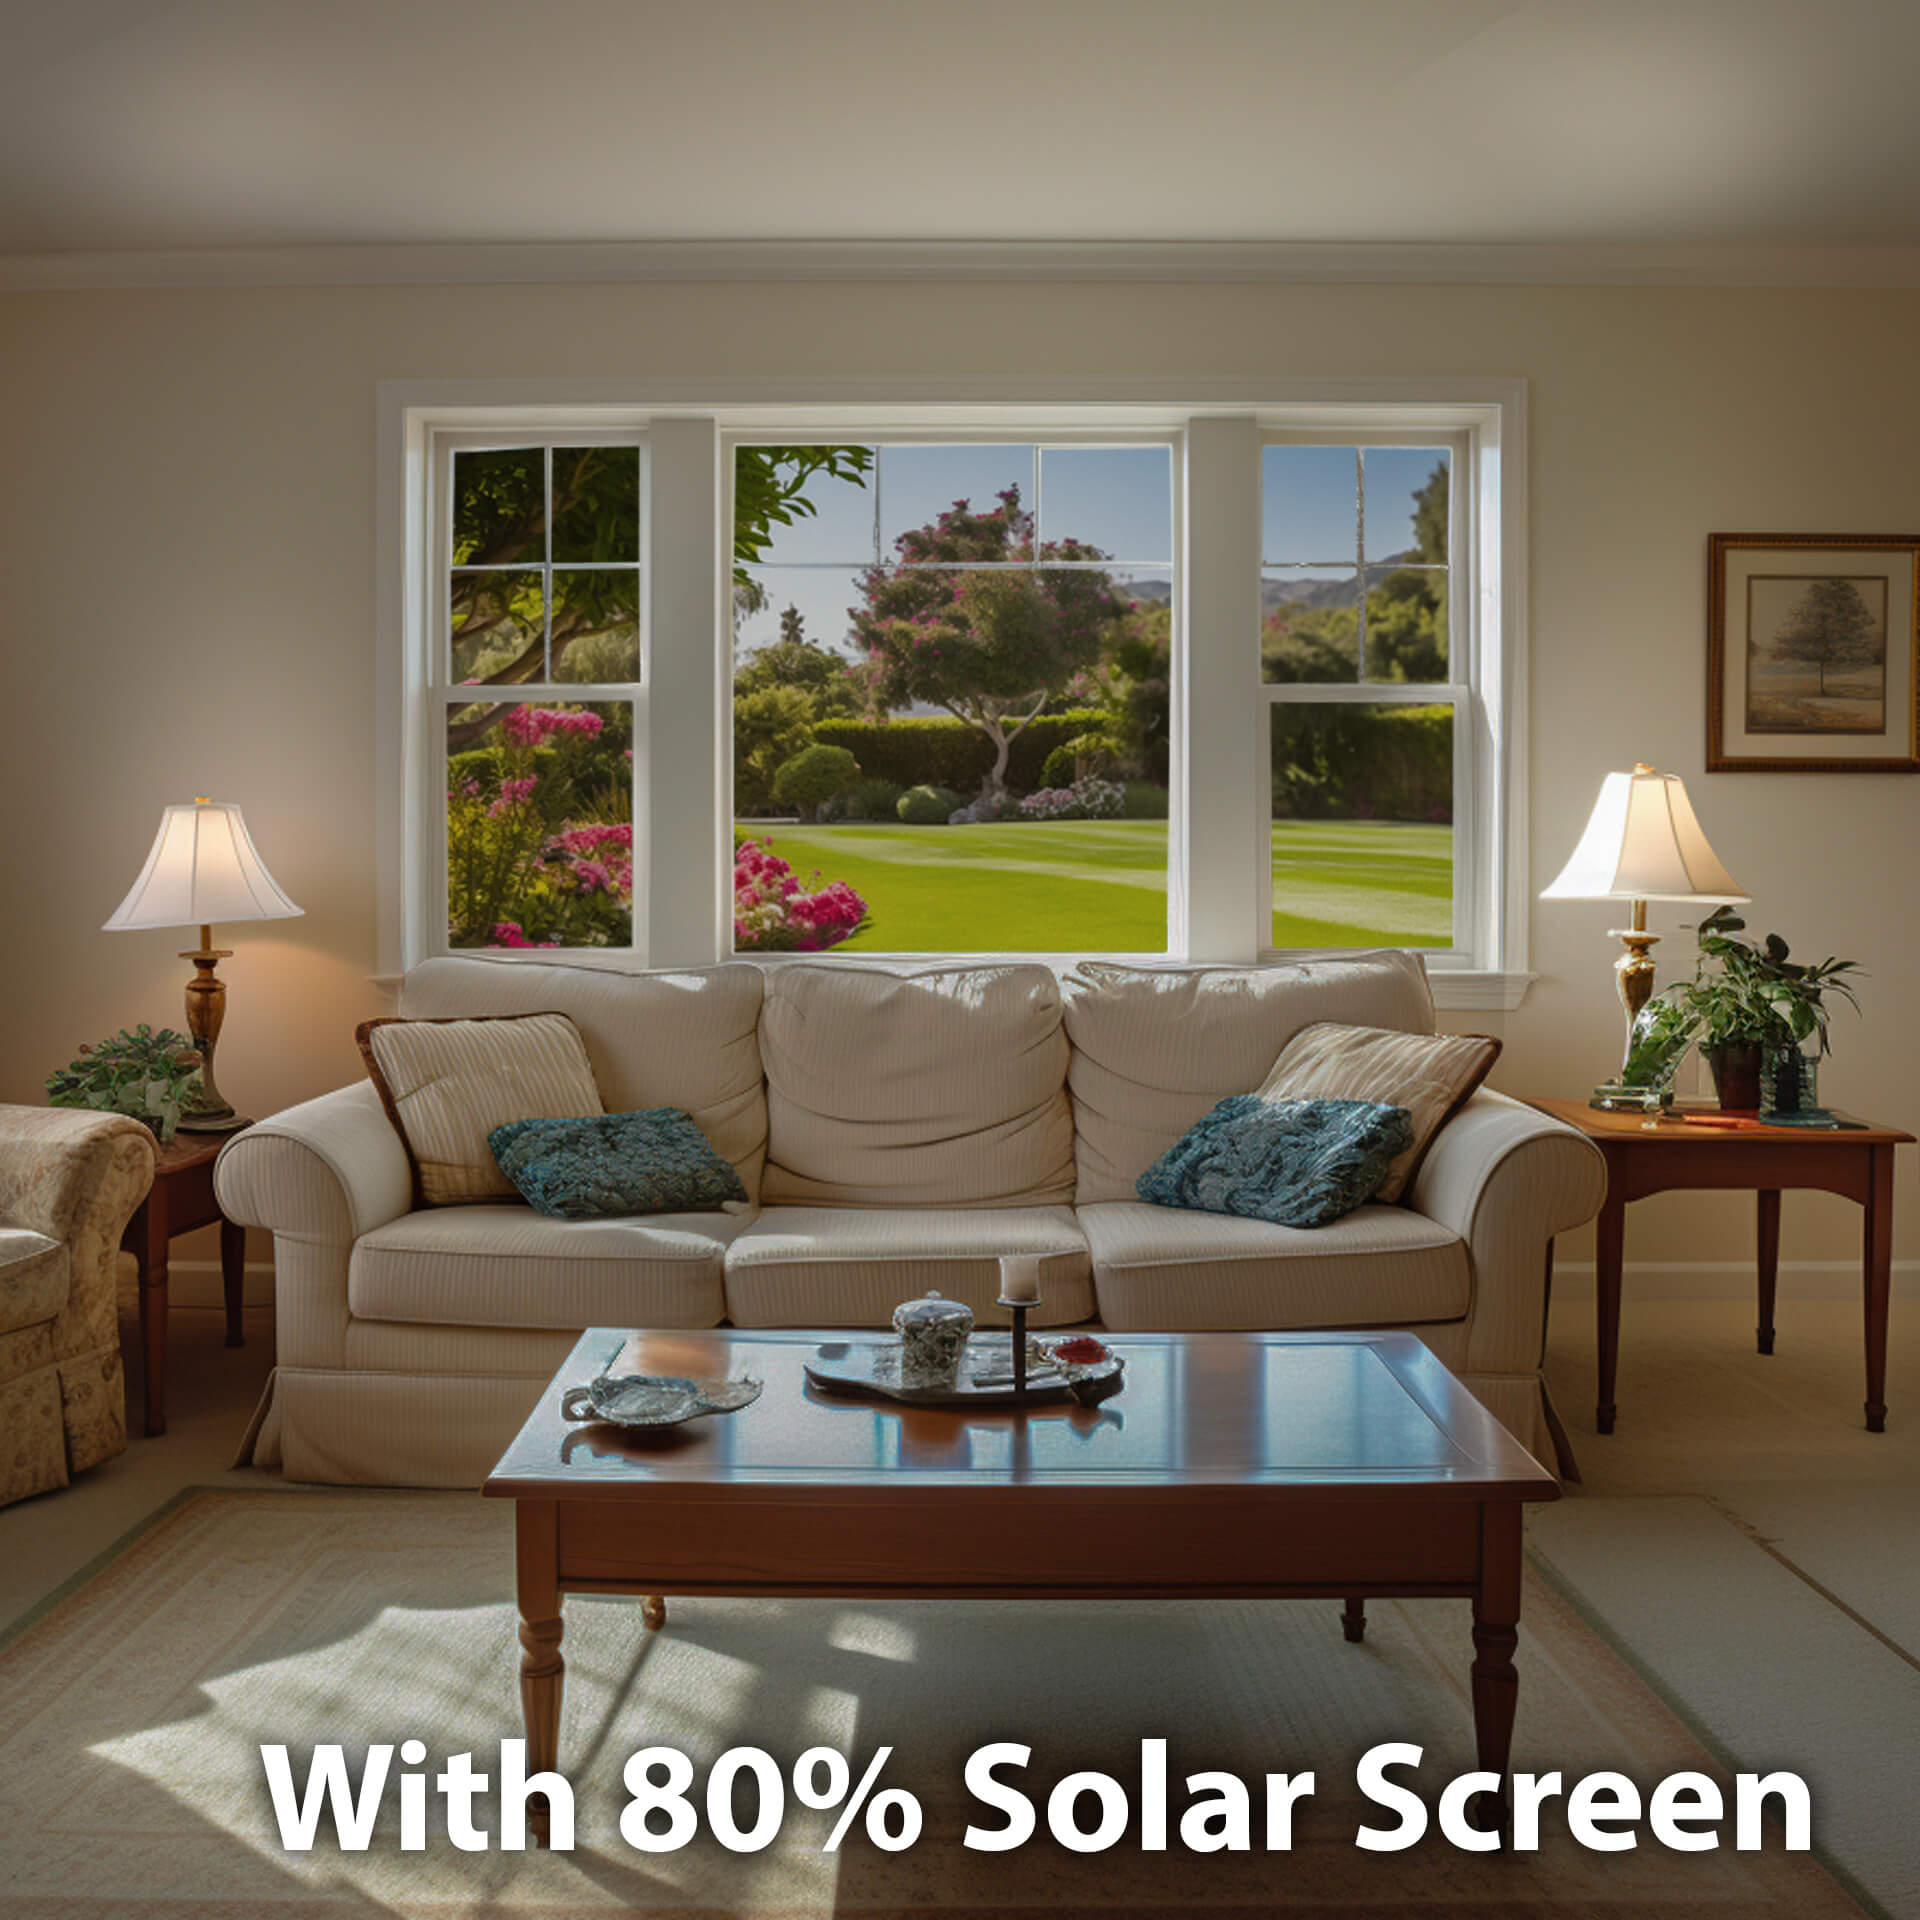 Outward Visibility with a solar screen